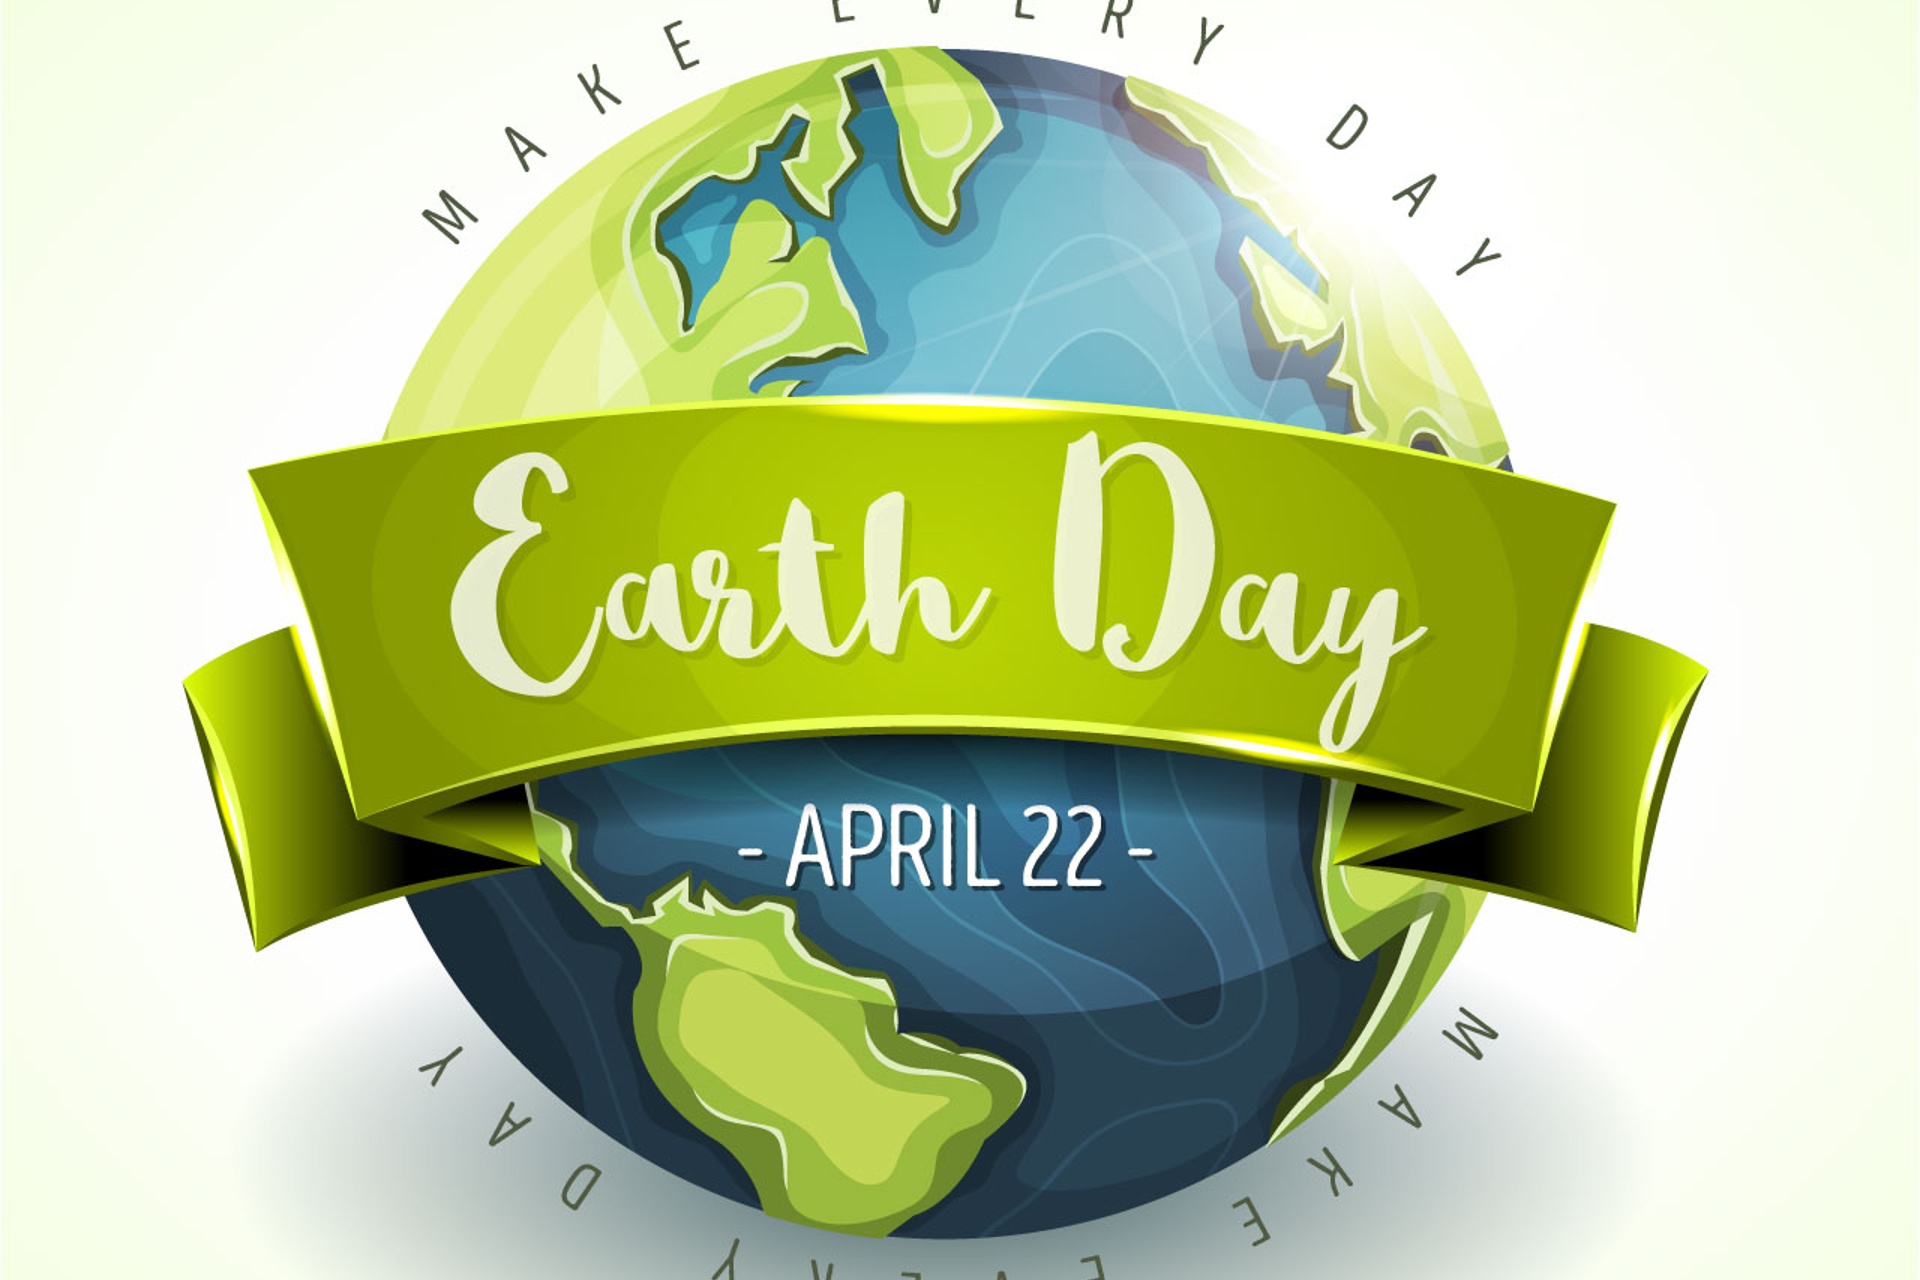 A Reflection for Earth Day 2020 by Sr Nellie McLaughlin